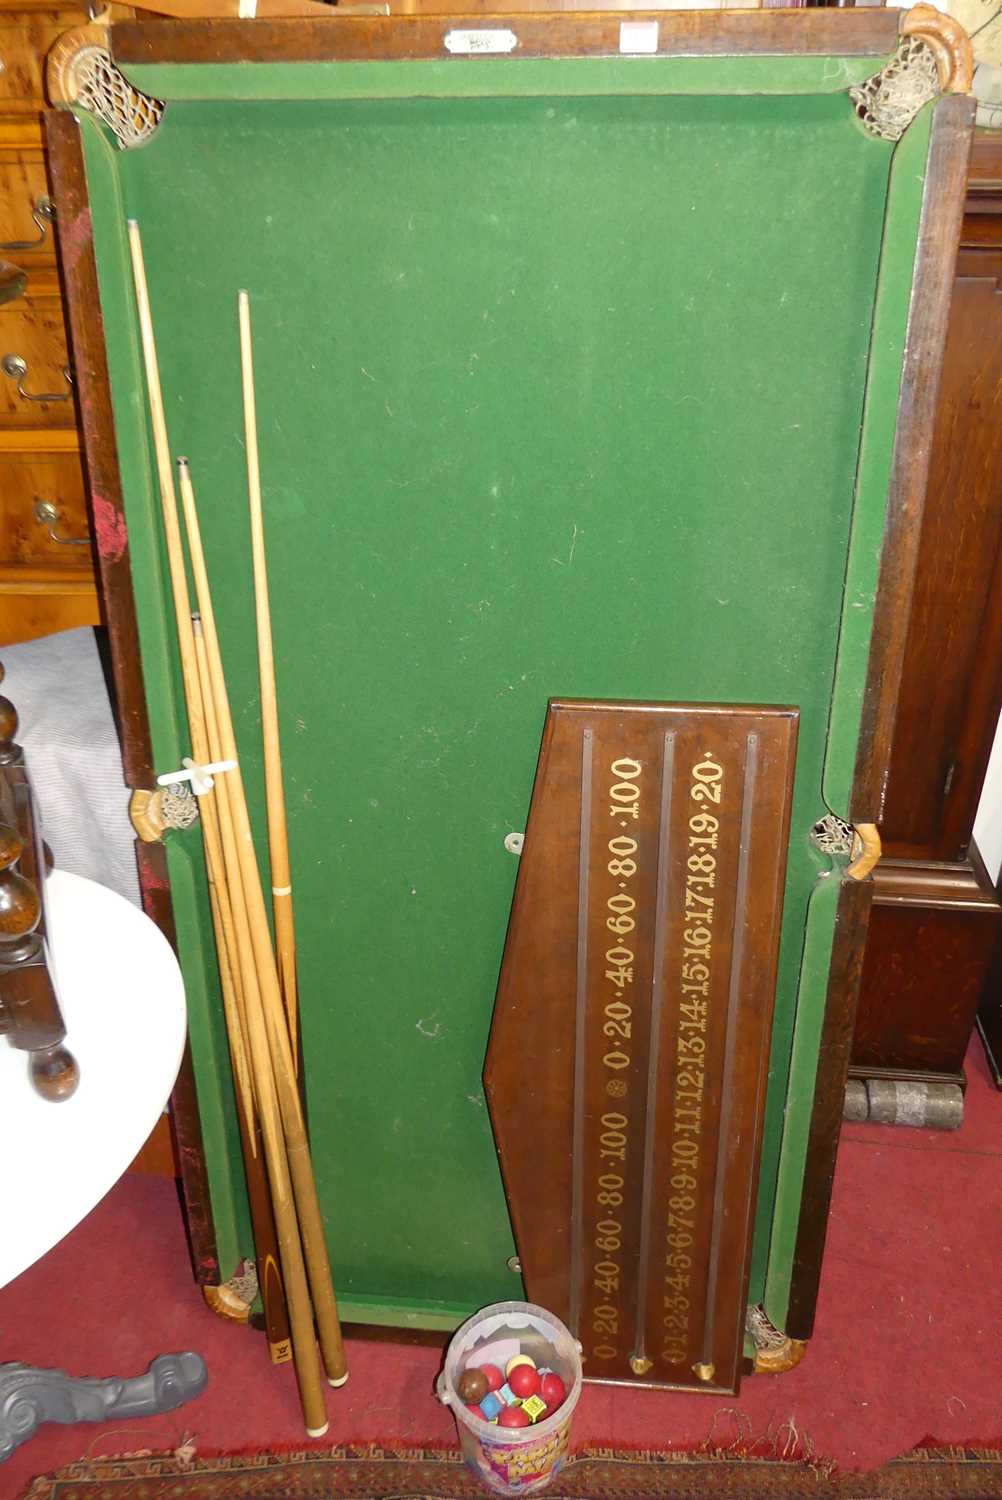 A Sykes of London quarter size snooker table, with oak wall mounted scoreboard, sundry cues, and